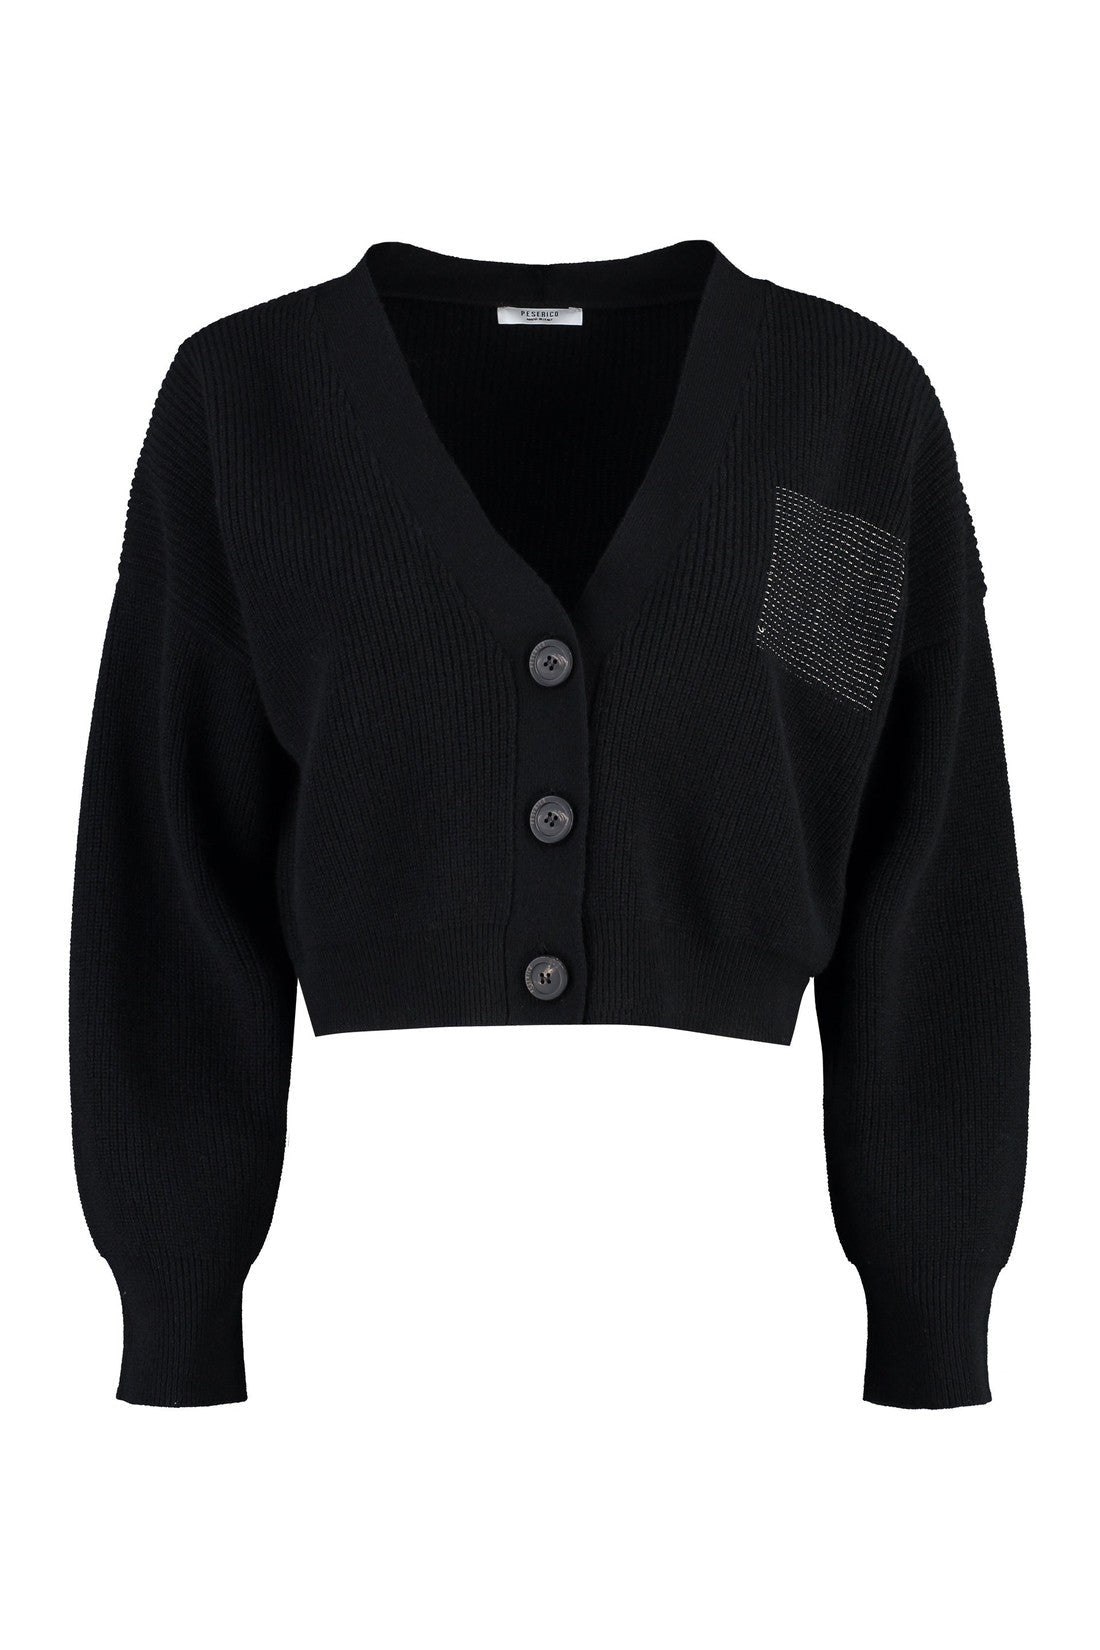 Peserico-OUTLET-SALE-Wool and cashmere cardigan-ARCHIVIST